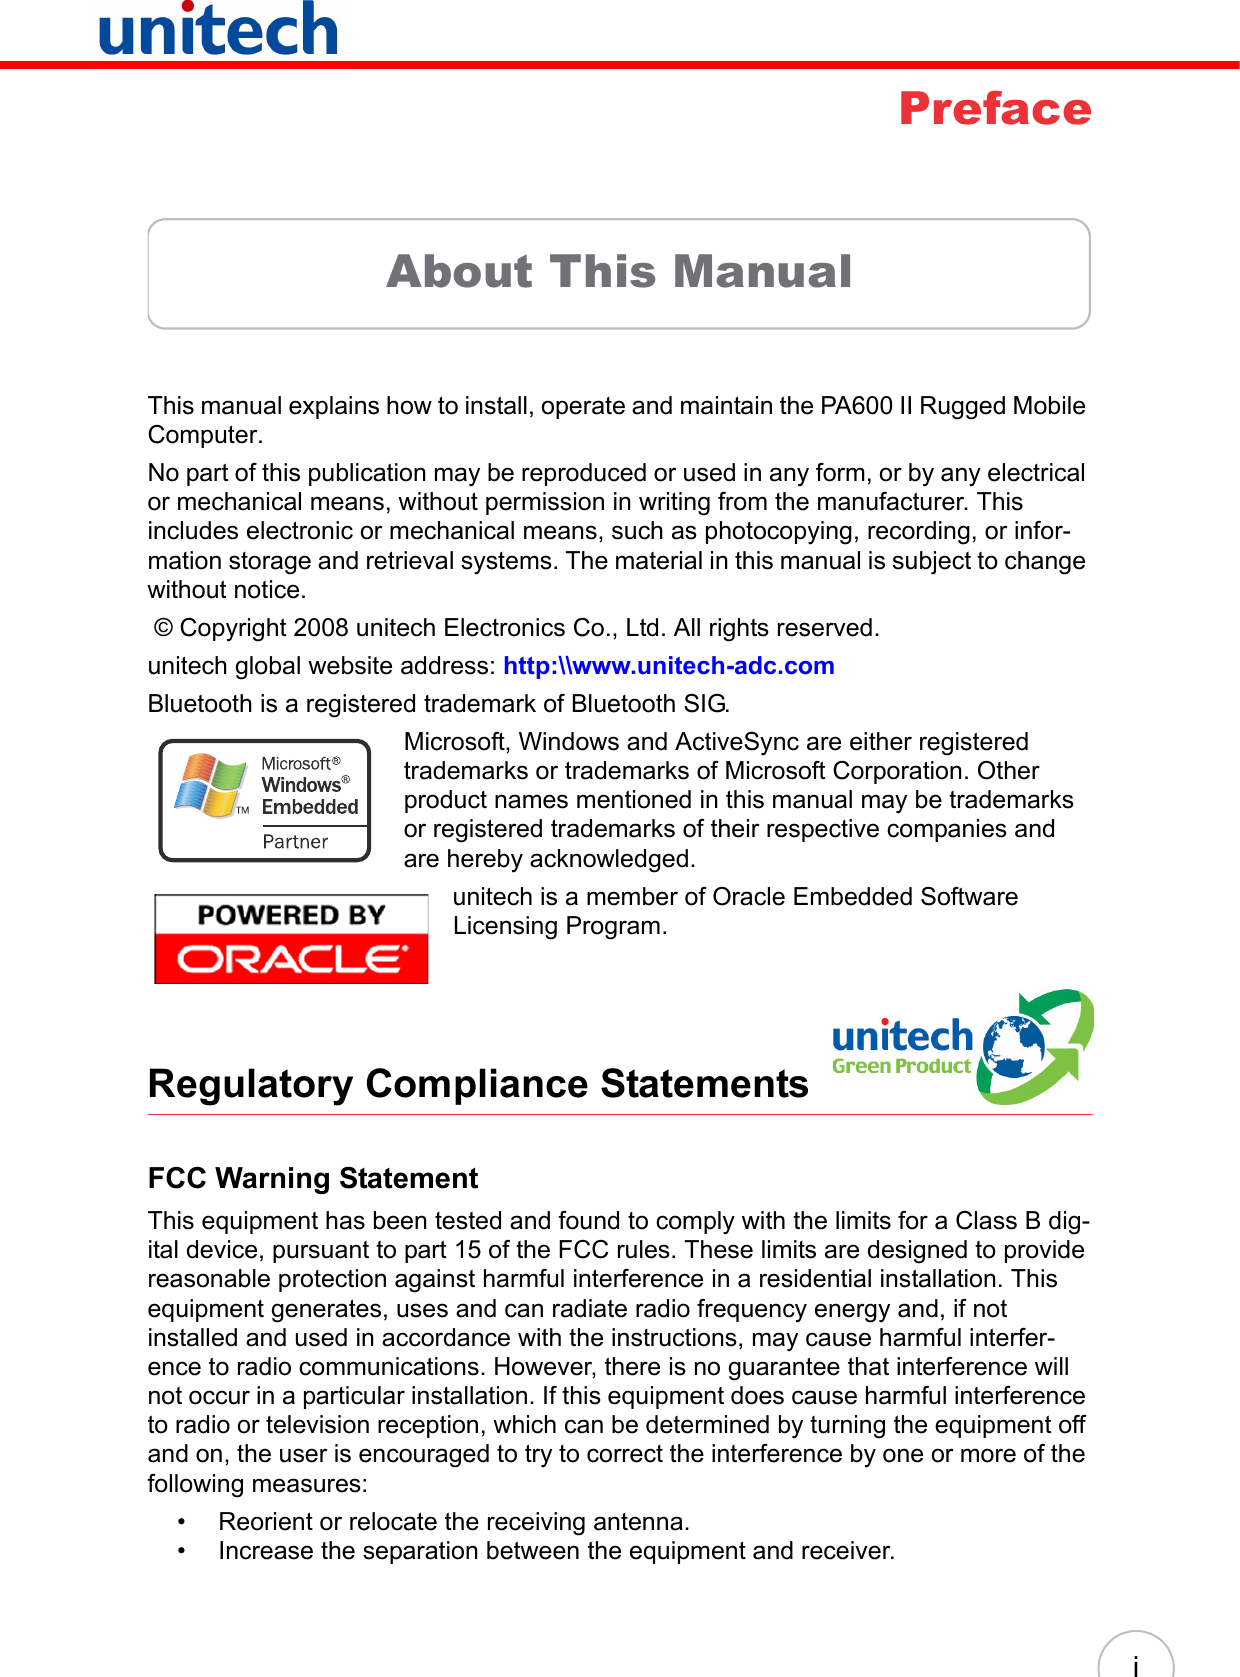 iPrefaceAbout This ManualThis manual explains how to install, operate and maintain the PA600 II Rugged Mobile Computer.No part of this publication may be reproduced or used in any form, or by any electrical or mechanical means, without permission in writing from the manufacturer. This includes electronic or mechanical means, such as photocopying, recording, or infor-mation storage and retrieval systems. The material in this manual is subject to change without notice. © Copyright 2008 unitech Electronics Co., Ltd. All rights reserved.unitech global website address: http:\\www.unitech-adc.comBluetooth is a registered trademark of Bluetooth SIG.Microsoft, Windows and ActiveSync are either registered trademarks or trademarks of Microsoft Corporation. Other product names mentioned in this manual may be trademarks or registered trademarks of their respective companies and are hereby acknowledged.unitech is a member of Oracle Embedded Software Licensing Program.Regulatory Compliance StatementsFCC Warning StatementThis equipment has been tested and found to comply with the limits for a Class B dig-ital device, pursuant to part 15 of the FCC rules. These limits are designed to provide reasonable protection against harmful interference in a residential installation. This equipment generates, uses and can radiate radio frequency energy and, if not installed and used in accordance with the instructions, may cause harmful interfer-ence to radio communications. However, there is no guarantee that interference will not occur in a particular installation. If this equipment does cause harmful interference to radio or television reception, which can be determined by turning the equipment off and on, the user is encouraged to try to correct the interference by one or more of the following measures:• Reorient or relocate the receiving antenna.• Increase the separation between the equipment and receiver.